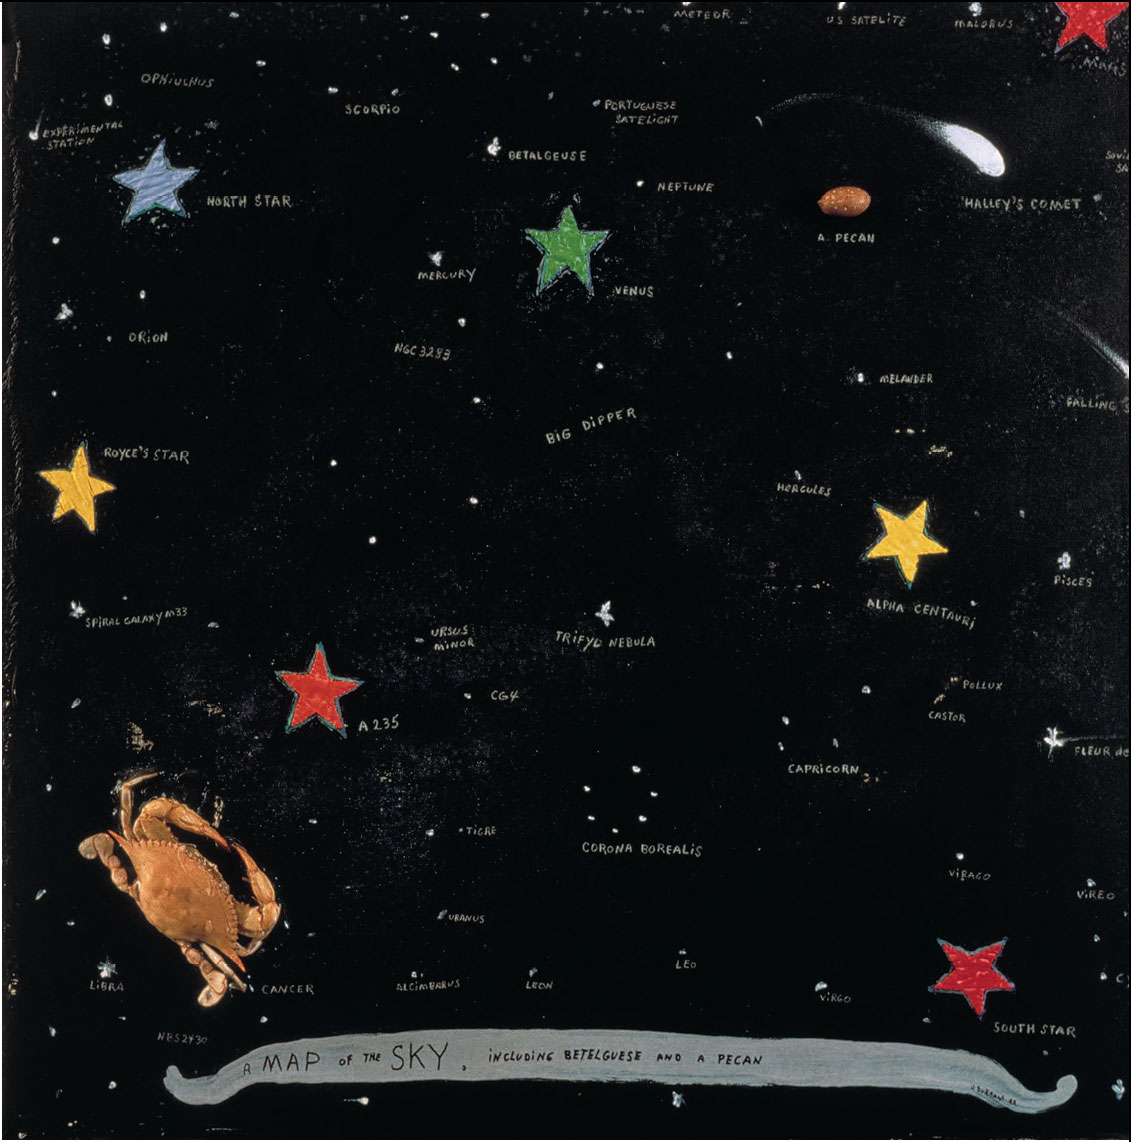 A Map of the Sky including Betelguese and a Pecan (1993) by Jimmie Durham, as reproduced in Universe: Exploring the Astronomical World